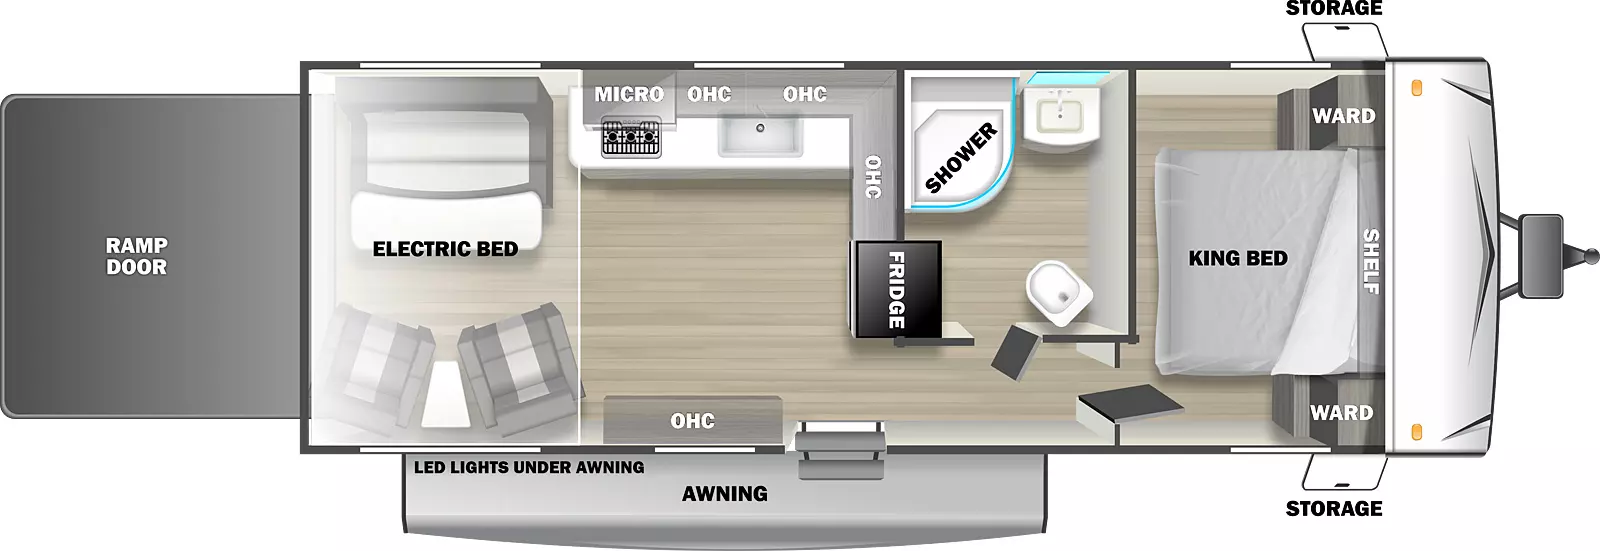 The FS2413GLE has one zero slideouts and one entry. Exterior features a rear ramp door, an awning with LED Lights under, and front pass thru storage. Interior layout front to back: King bed with shelf above and wardrobes on each side; off-door side full bathroom; refrigerator and kitchen countertop along inner wall that wraps to off-door side with overhead cabinet, sink, microwave and cooktop; door side entry and overhead cabinet; rear seating and table with electric bed above.